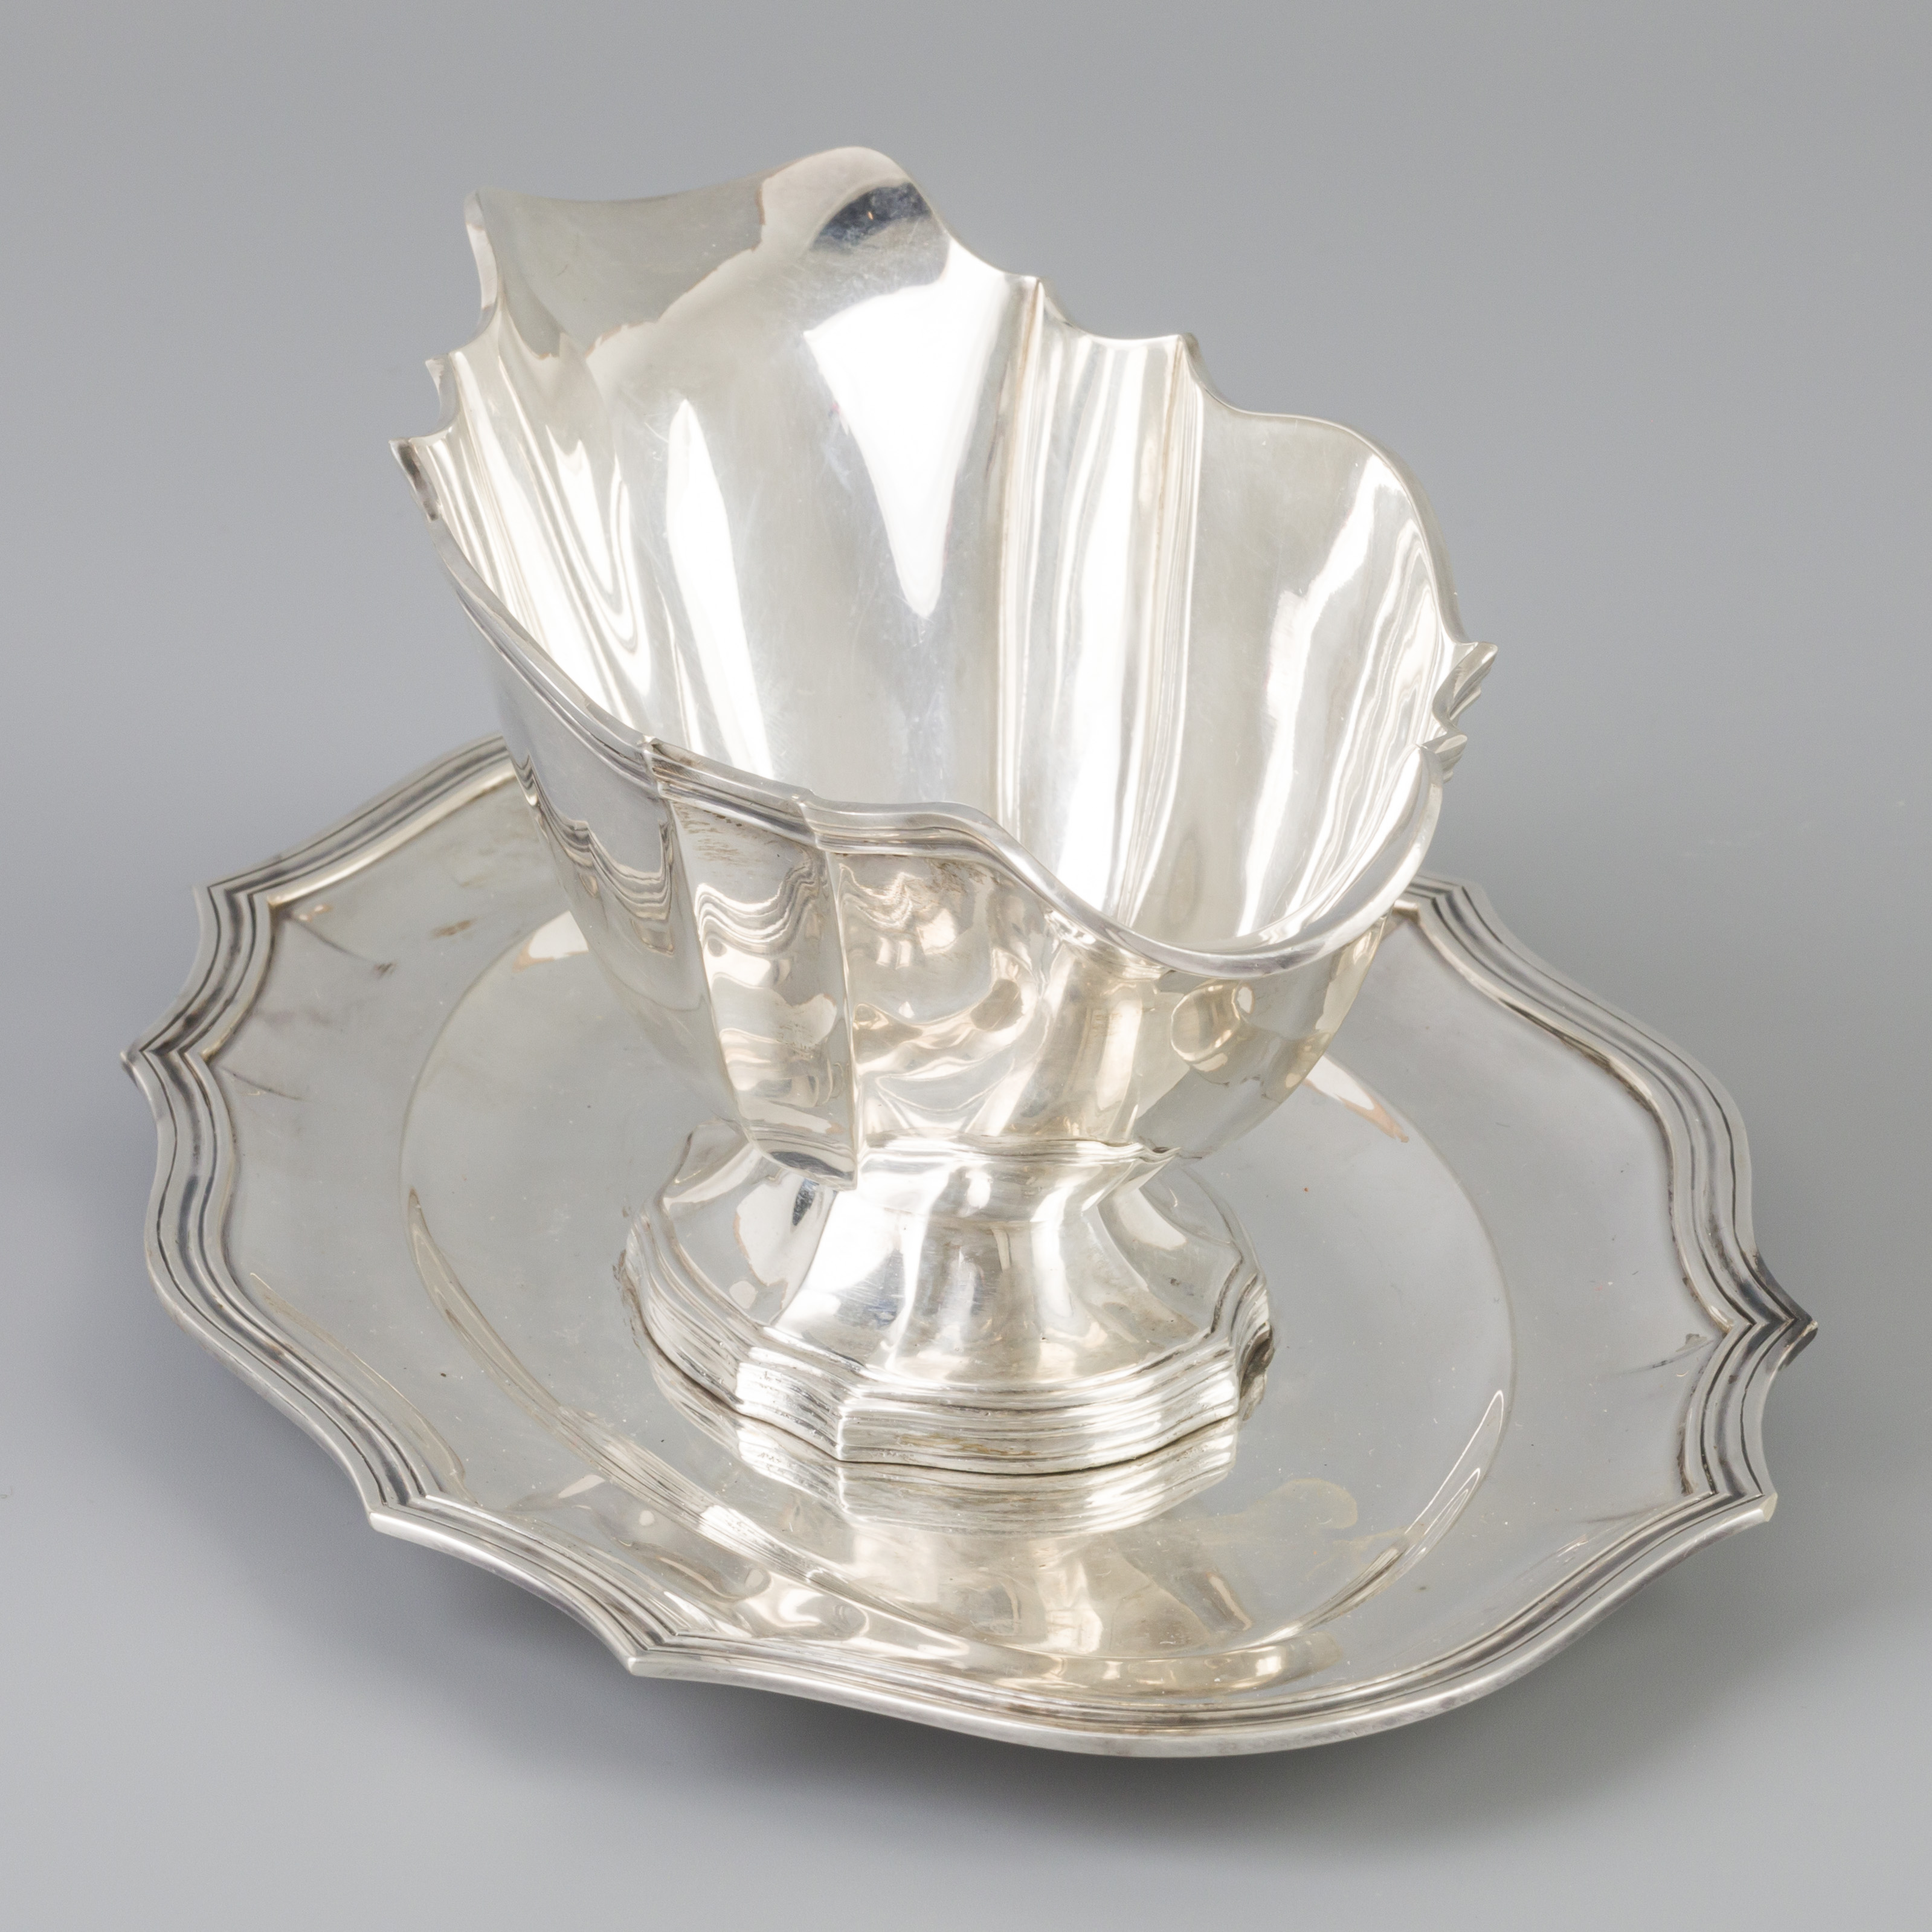 Sauce boat with silver saucer. - Image 2 of 5